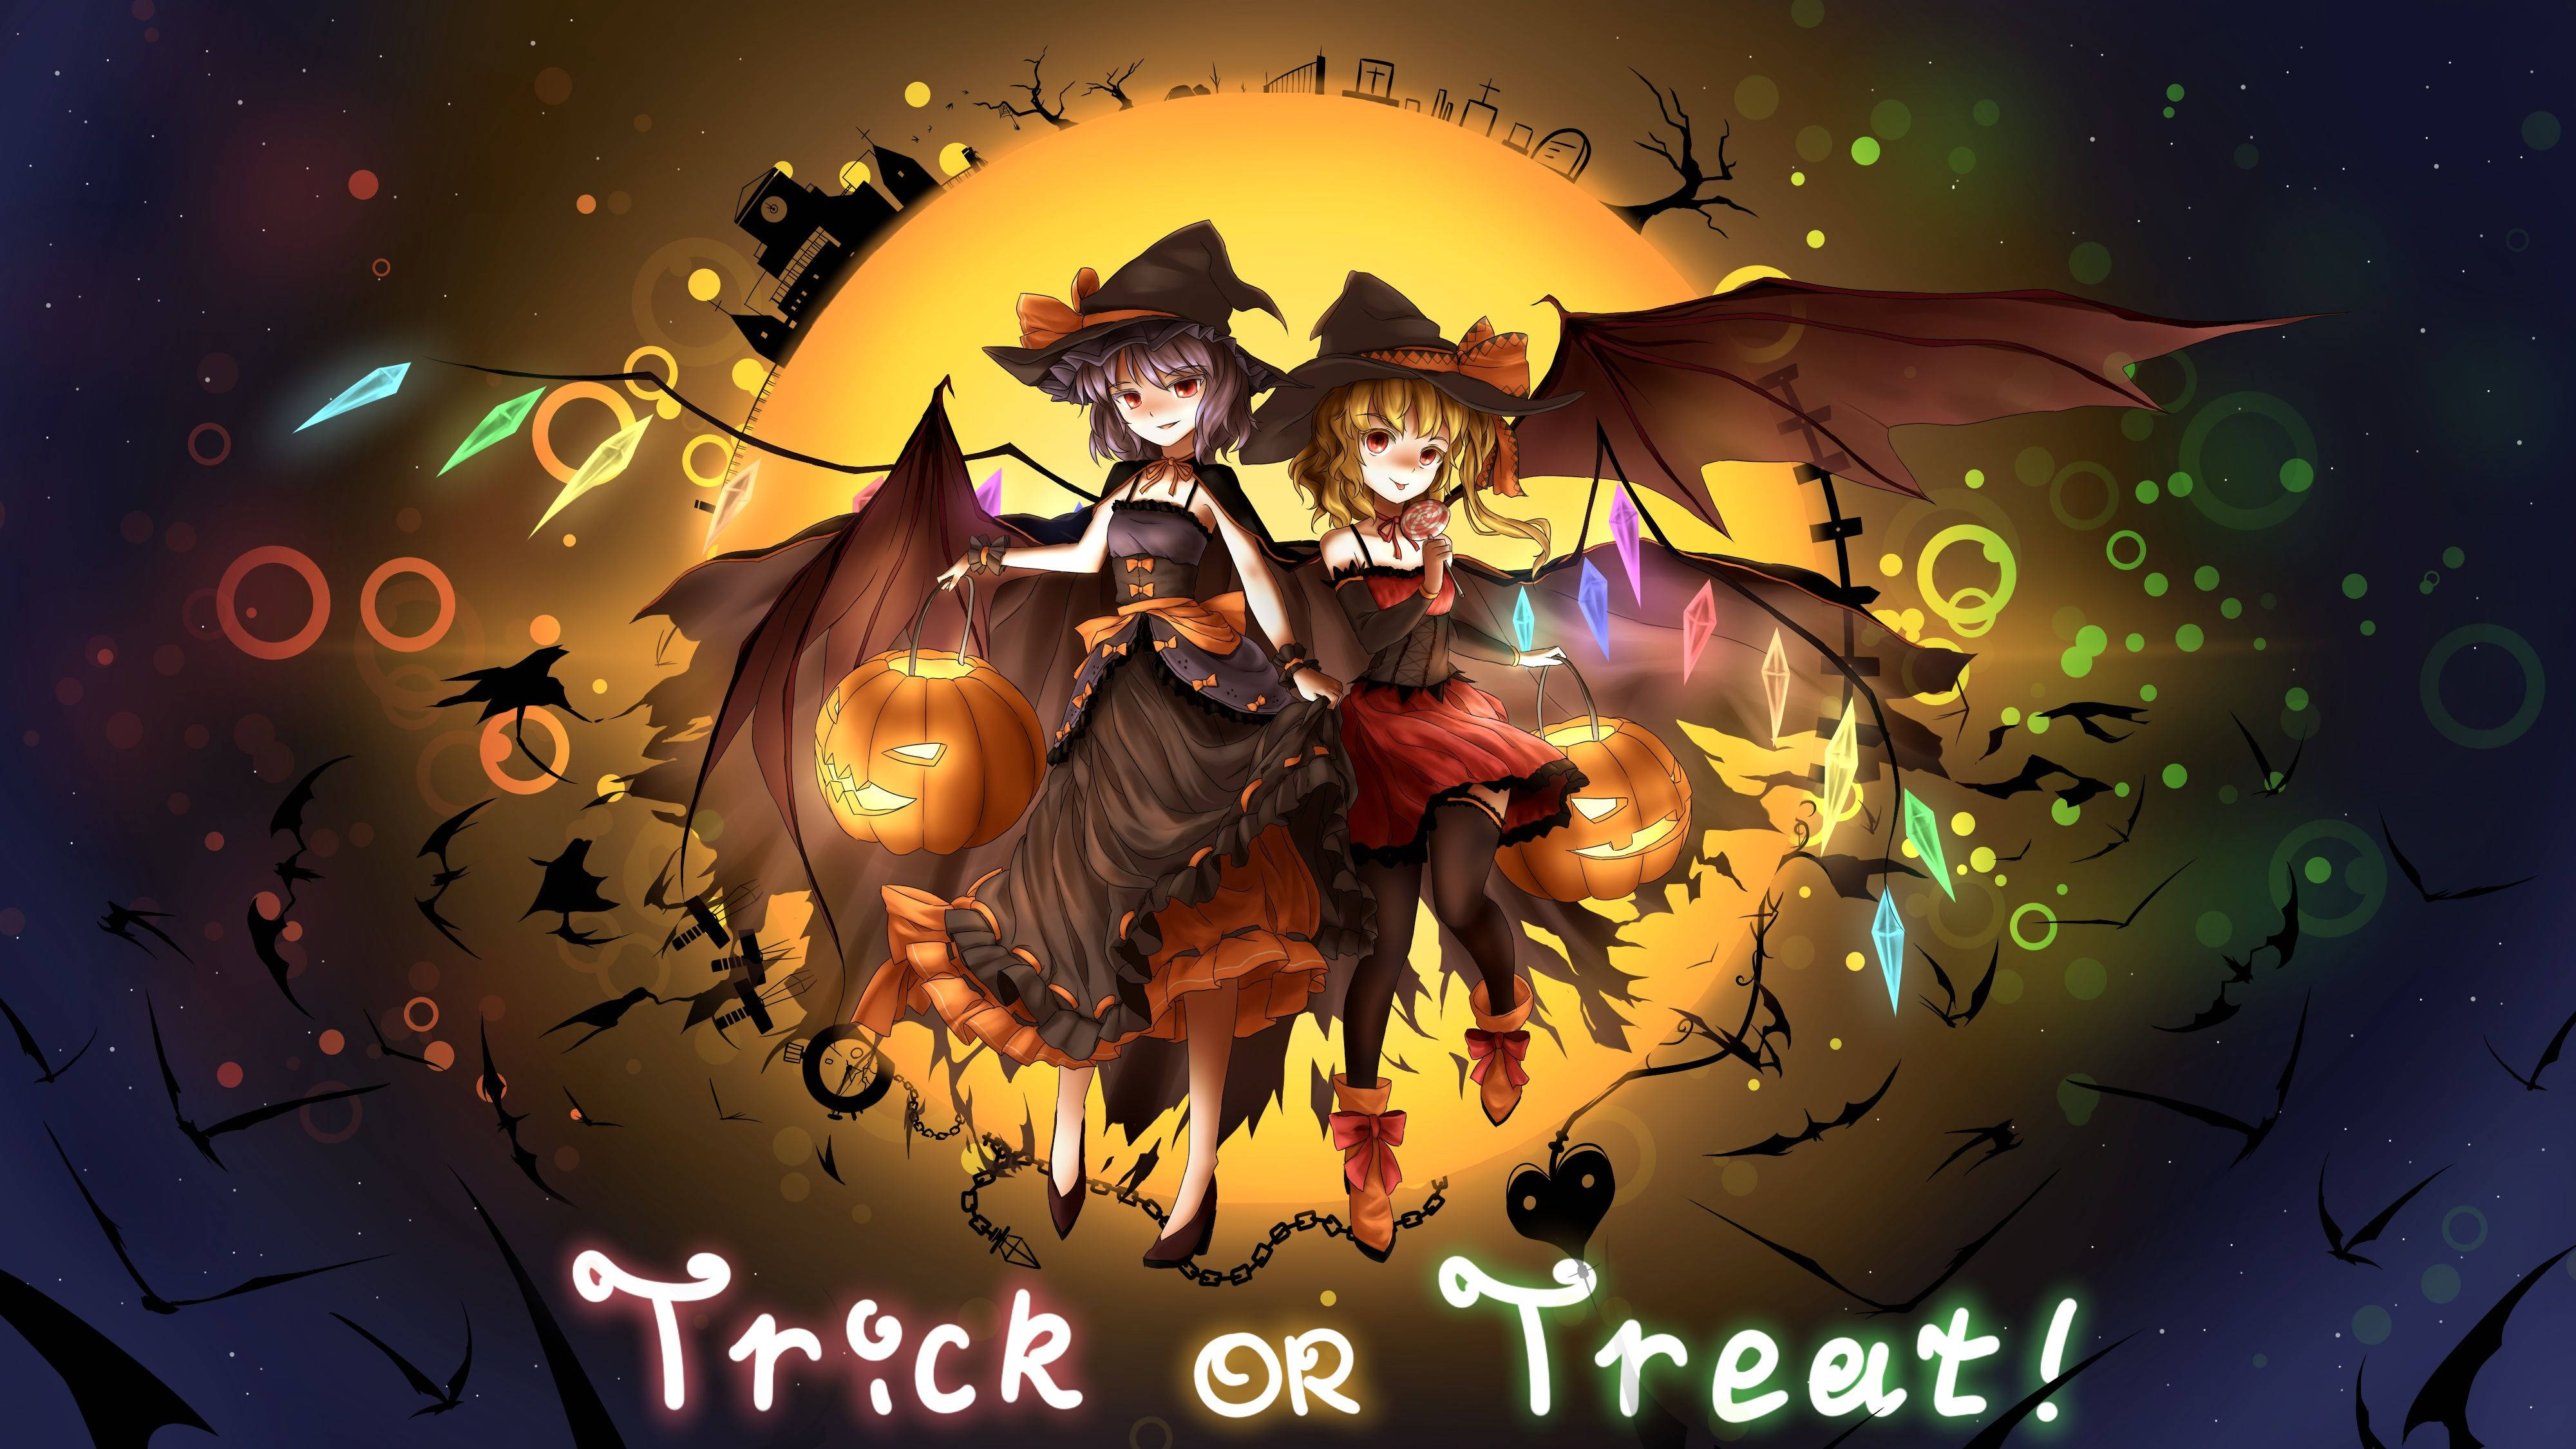 Anime Witch and Ghost Halloween Card Illustration Free PNG Image｜Illustoon